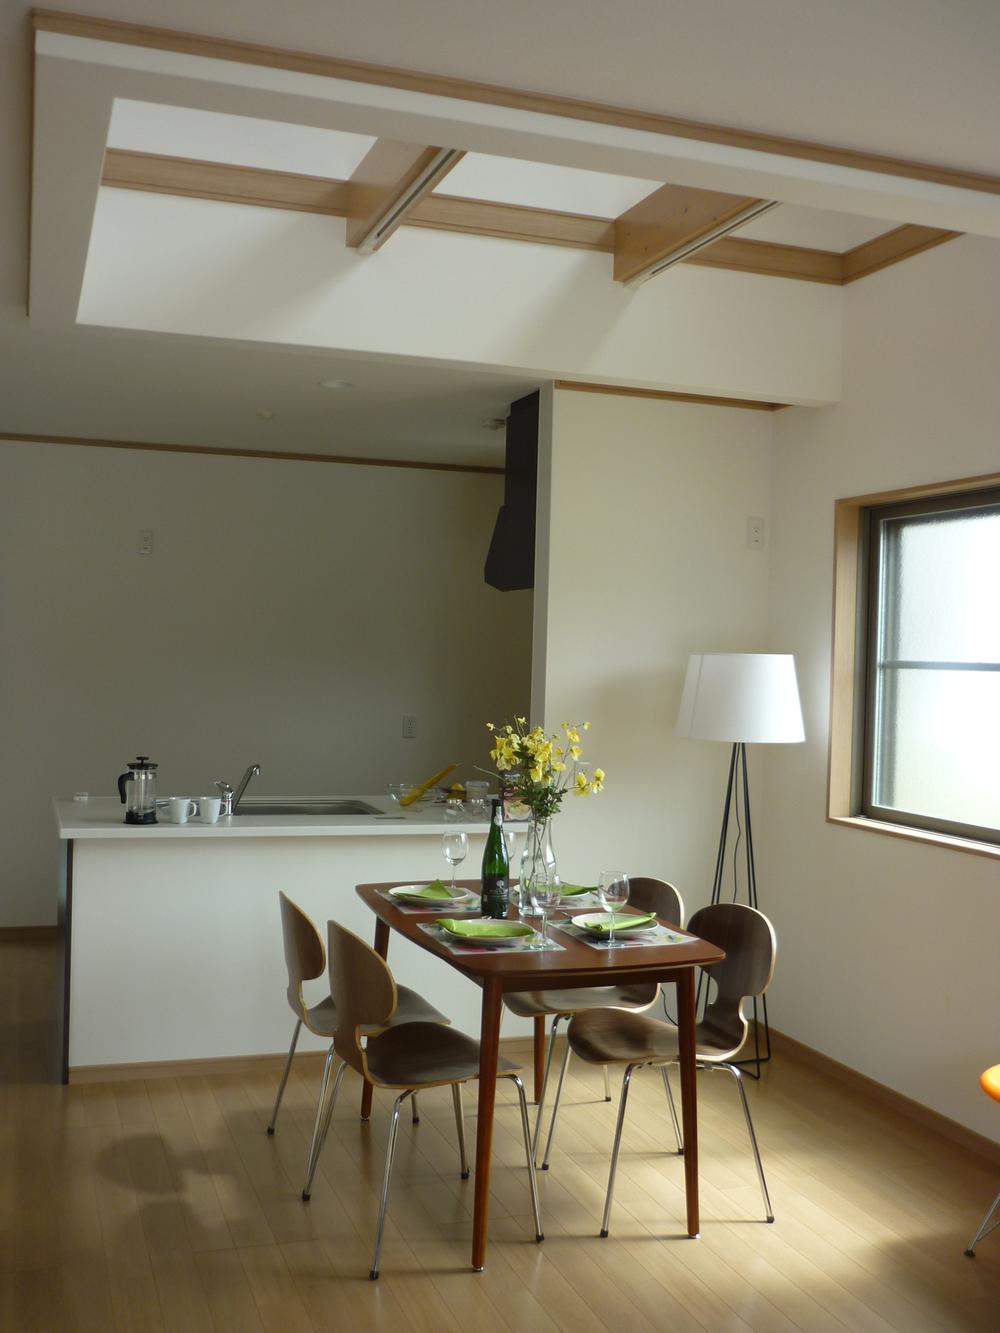 Kitchen. In model house kitchen face-to-face kitchen adopted, You can dish overlooks the room